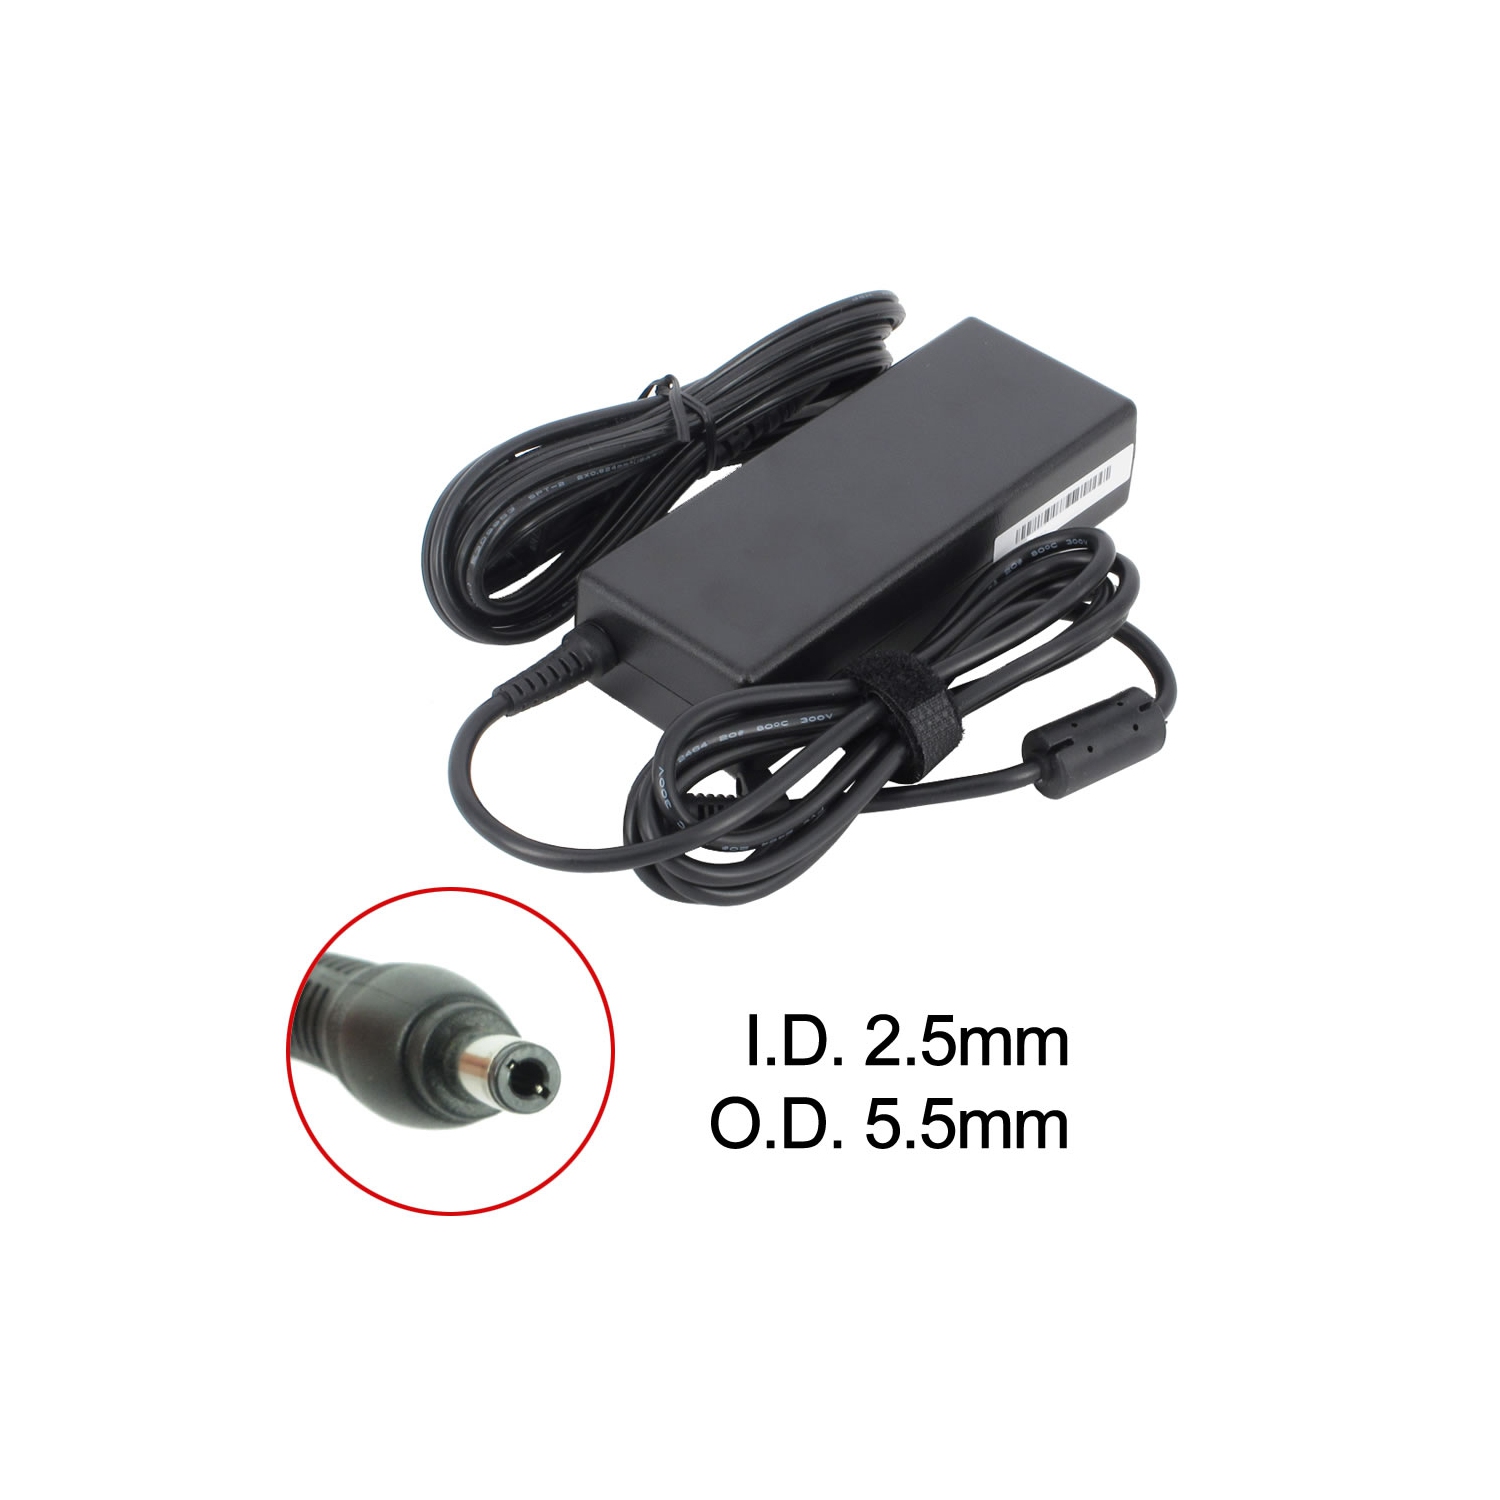 New Laptop AC Adapter for Lenovo G460, 103942, 808-875692-010A, 9T458, ADP-65 HB BBEF, PA-1900-36, SA80-3115